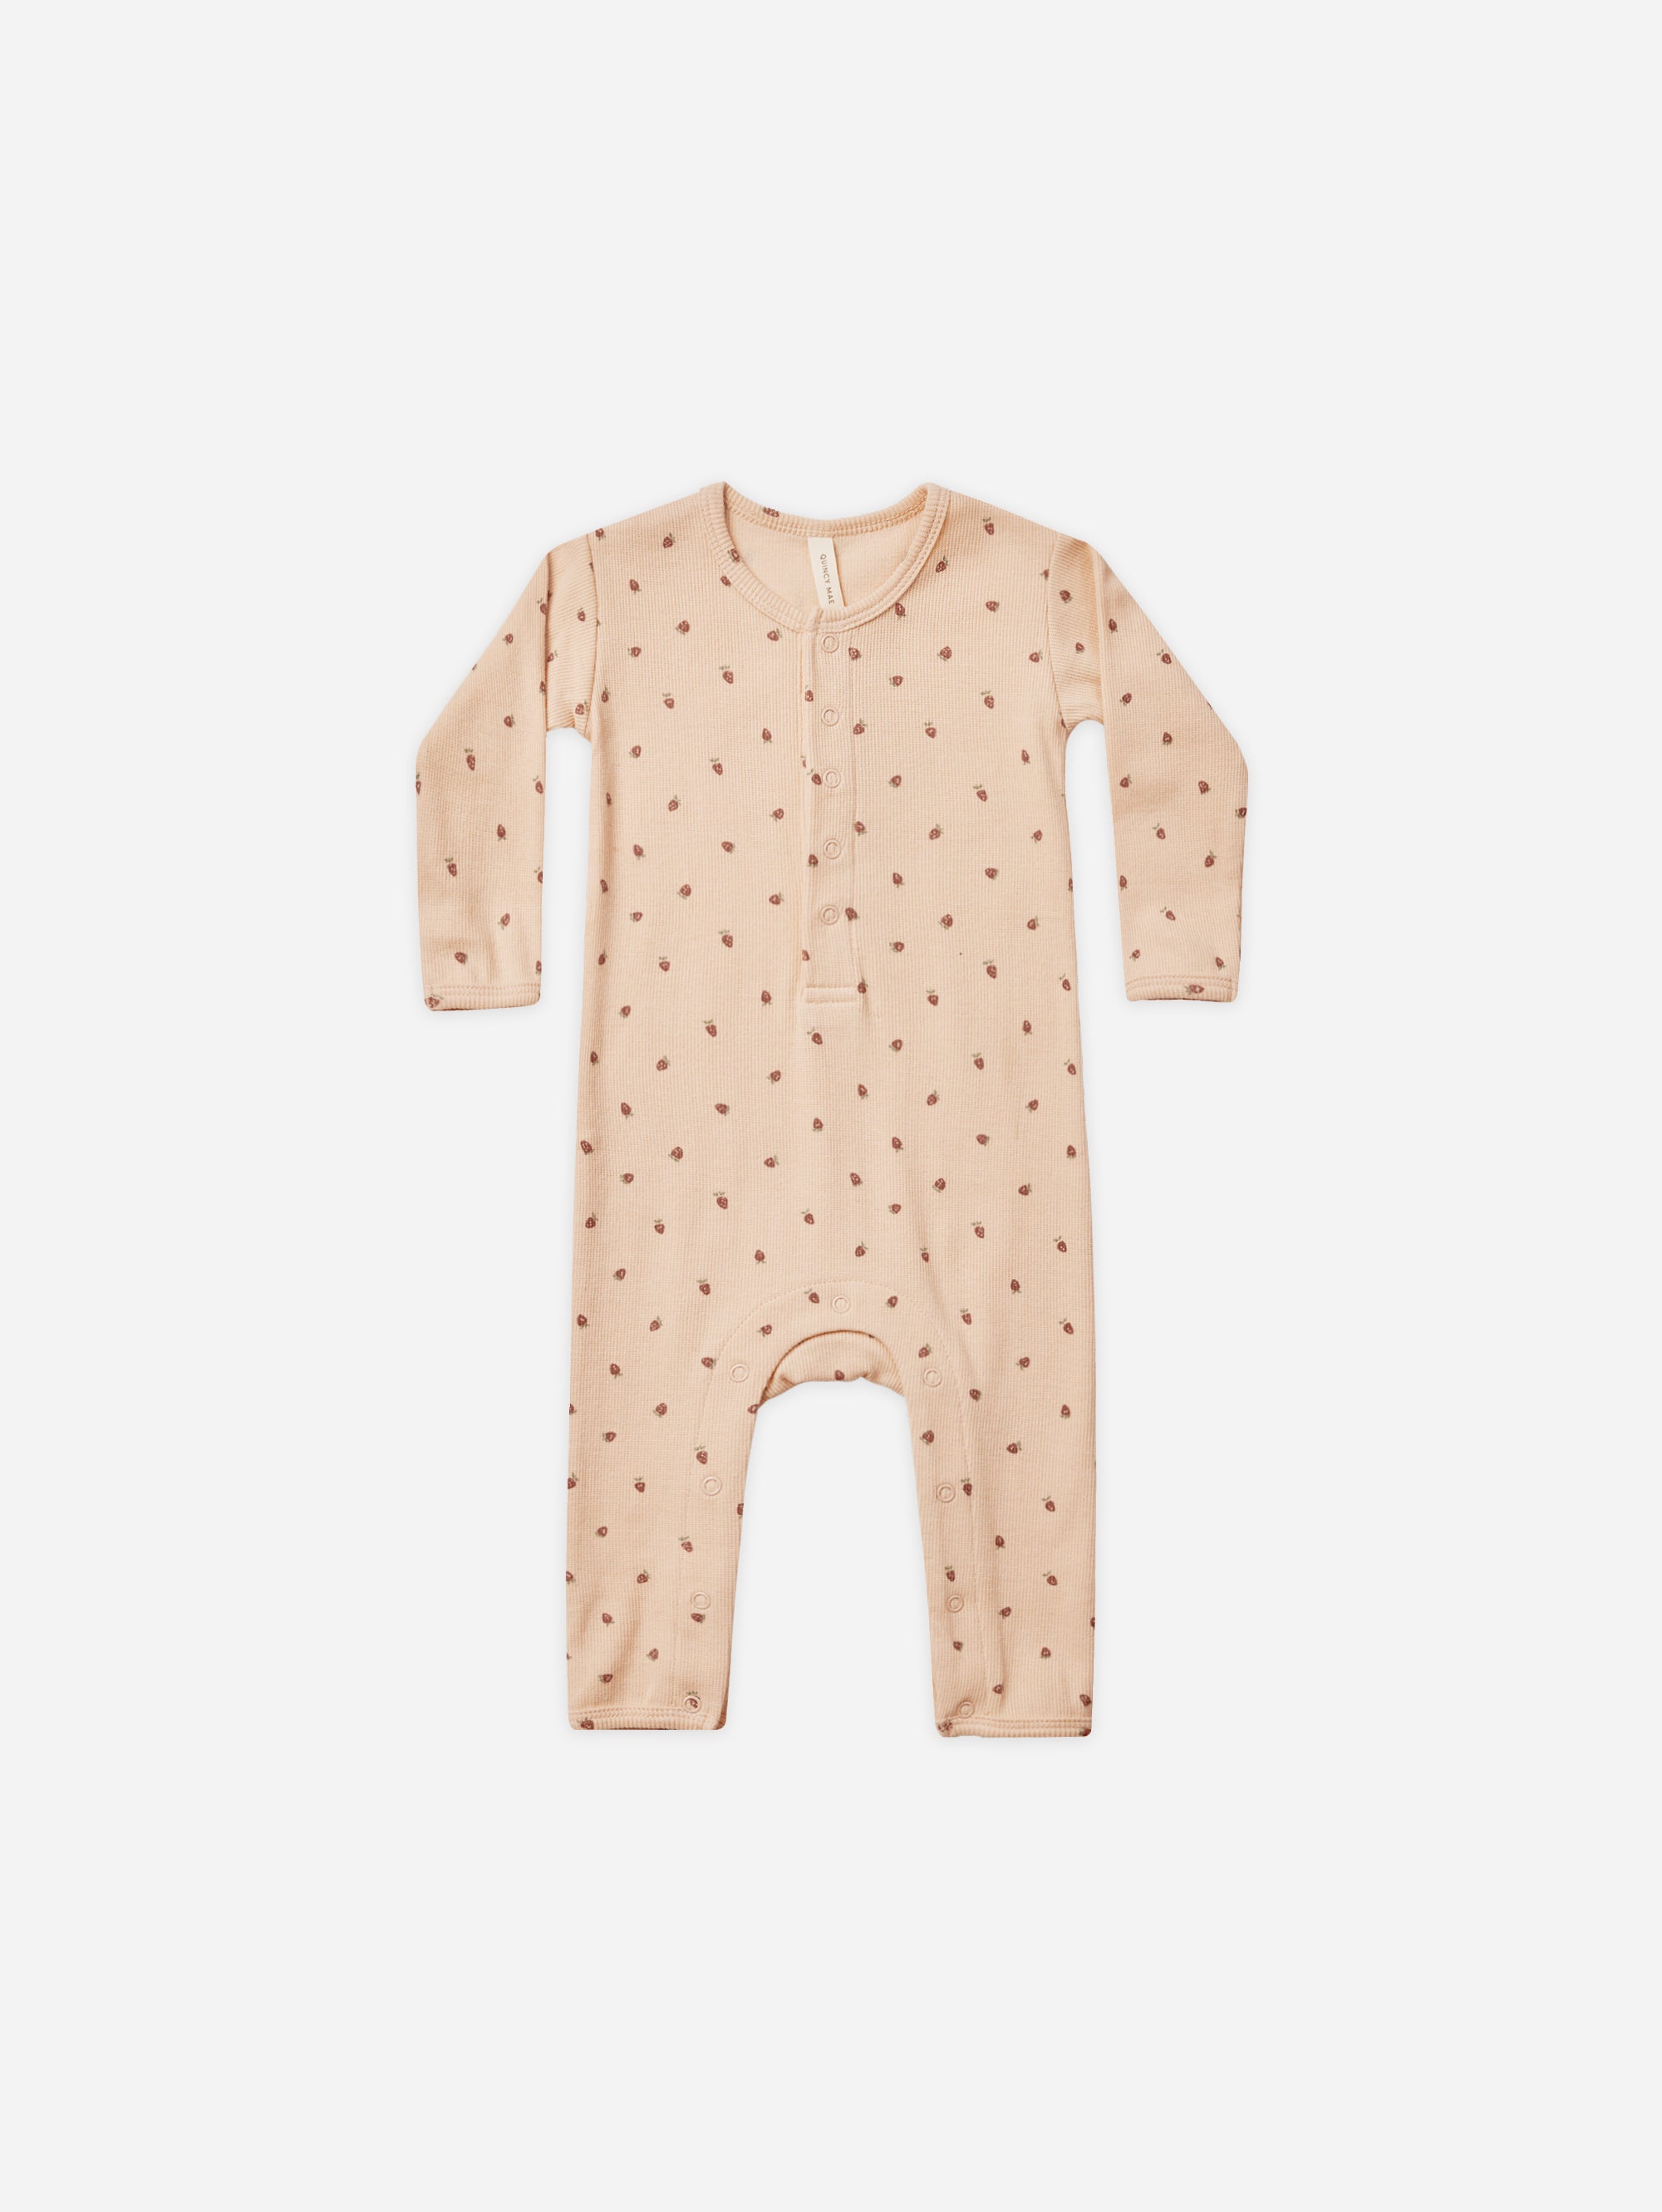 Ribbed Baby Jumpsuit || Strawberries - Rylee + Cru | Kids Clothes | Trendy Baby Clothes | Modern Infant Outfits |